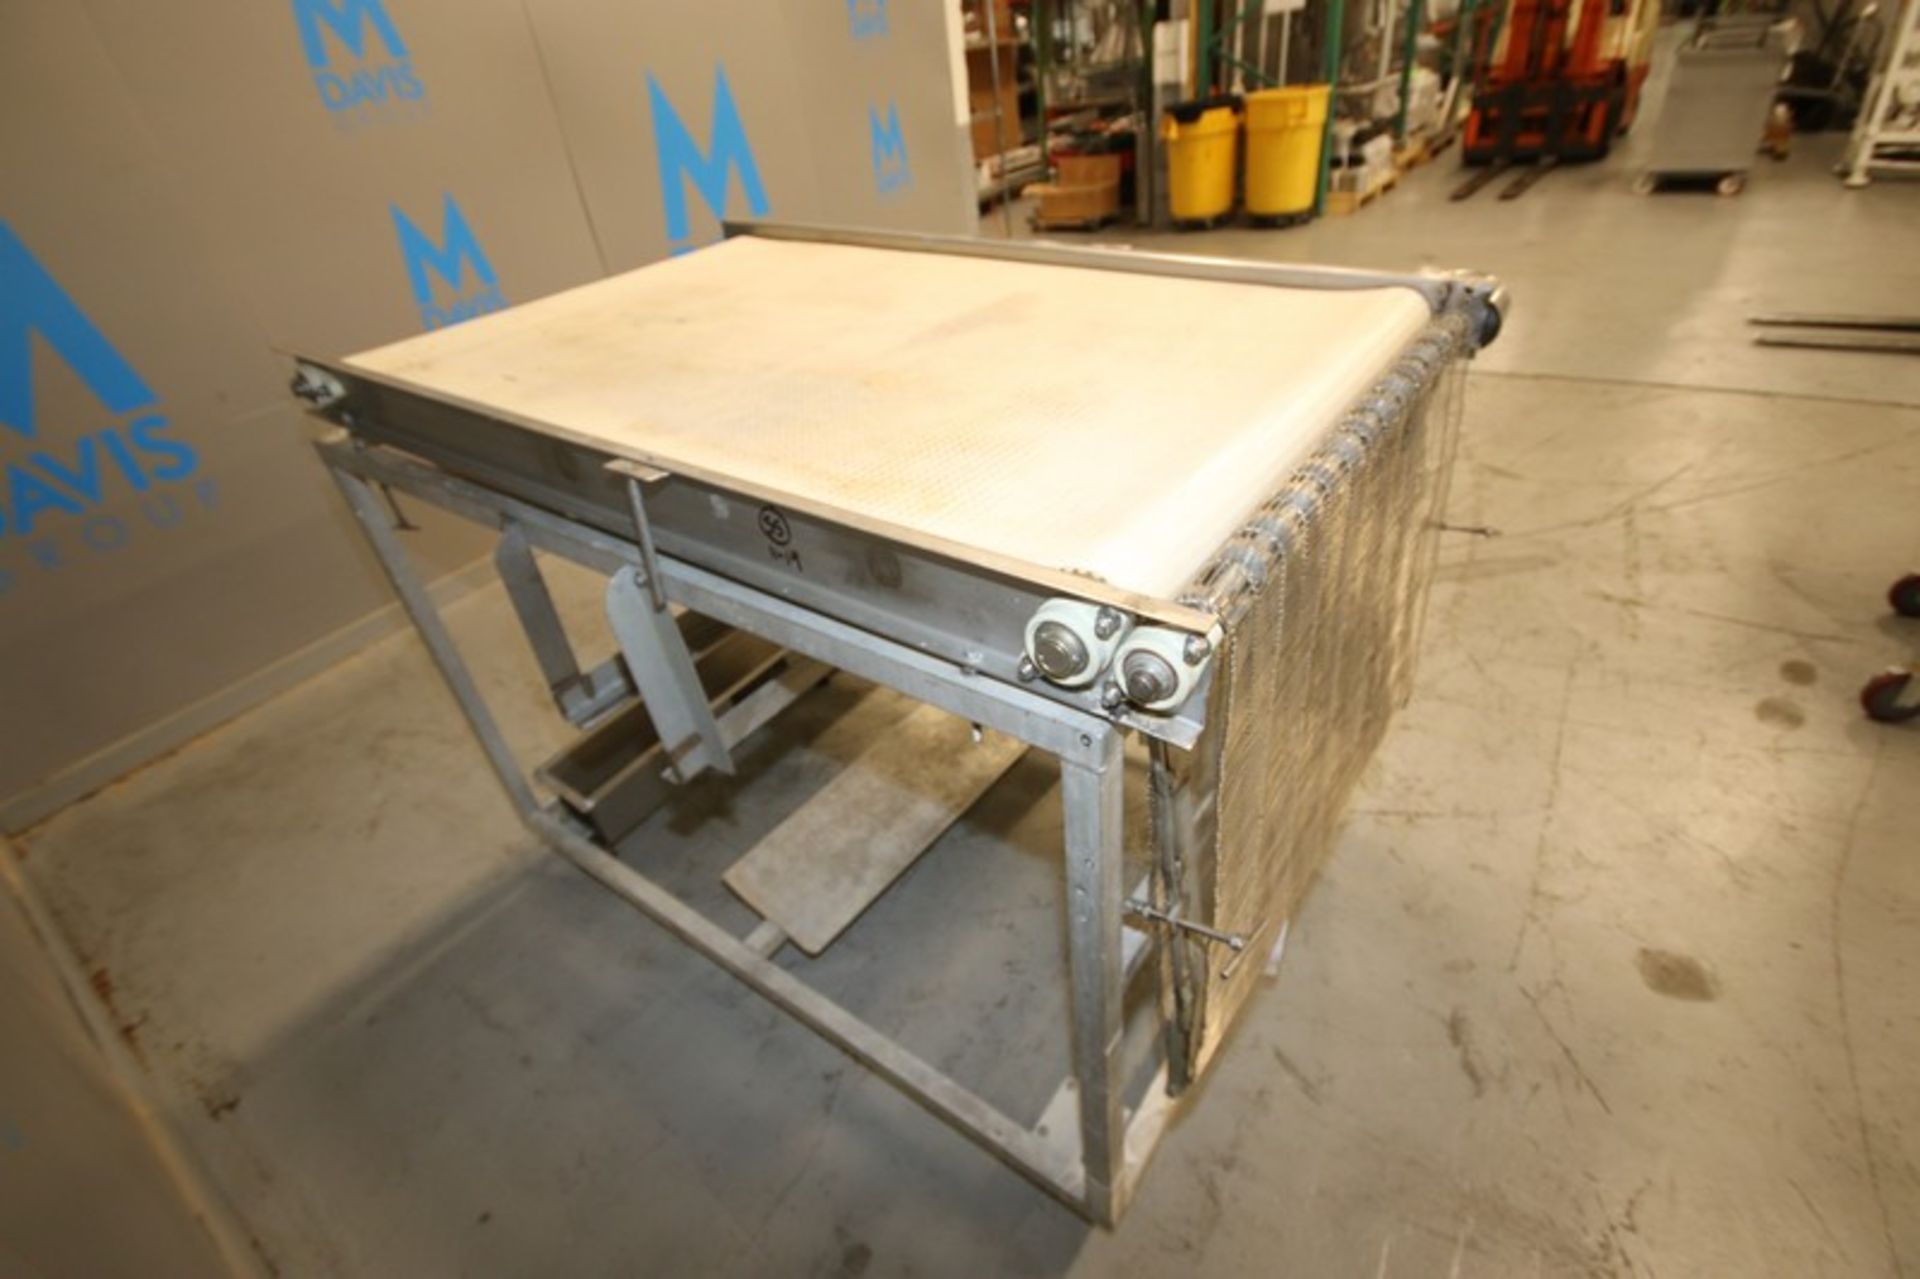 S/S Transfer Conveyor, with Conveyor Belt Aprox. 58" L x 36" W Plastic Belt, with S/S Mesh Infeed, - Image 3 of 7